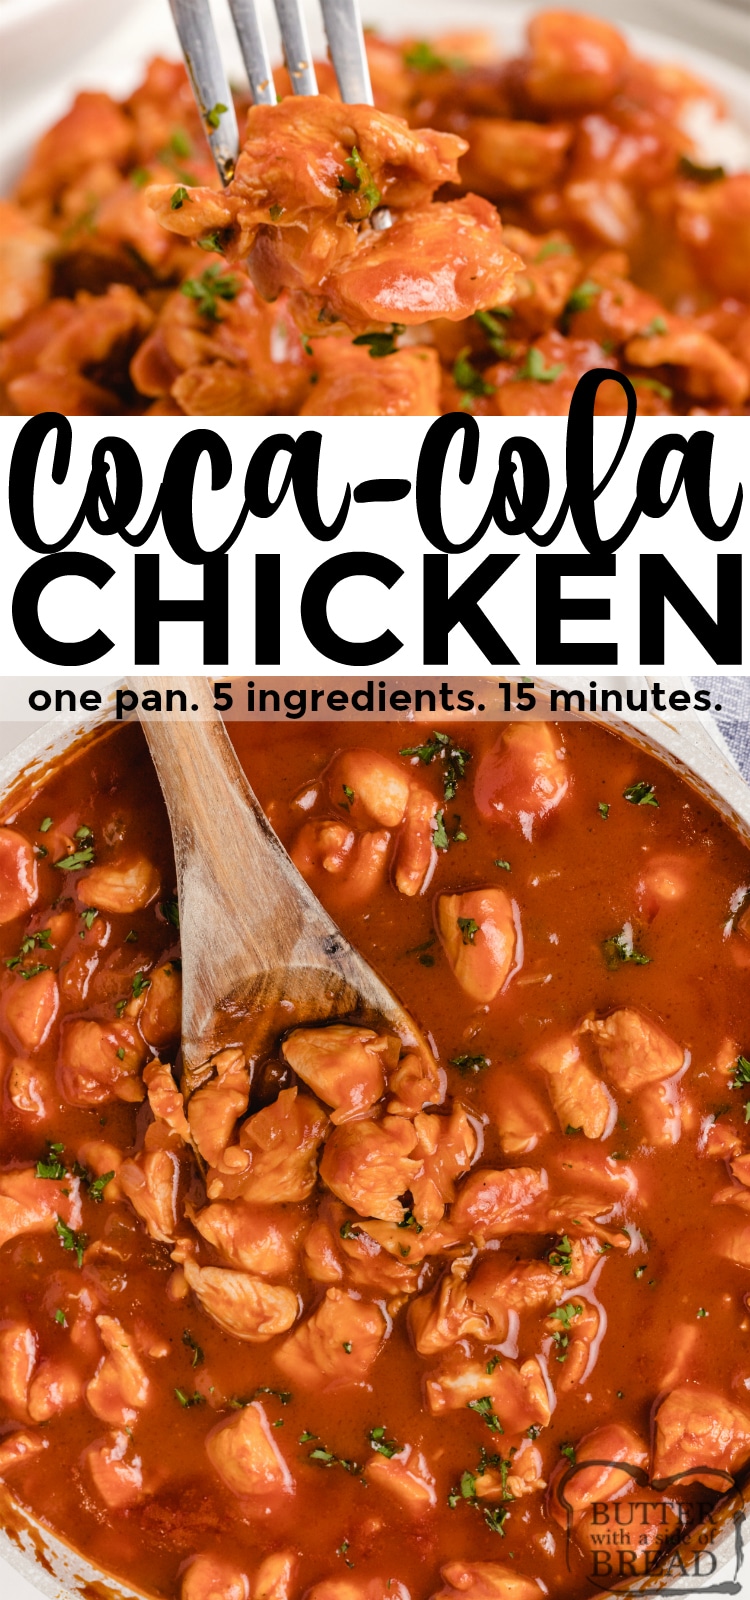 Coca-Cola Chicken is made with only 5 ingredients for a delicious dinner that the whole family will love. Easy chicken recipe full of flavor and comes together in minutes!